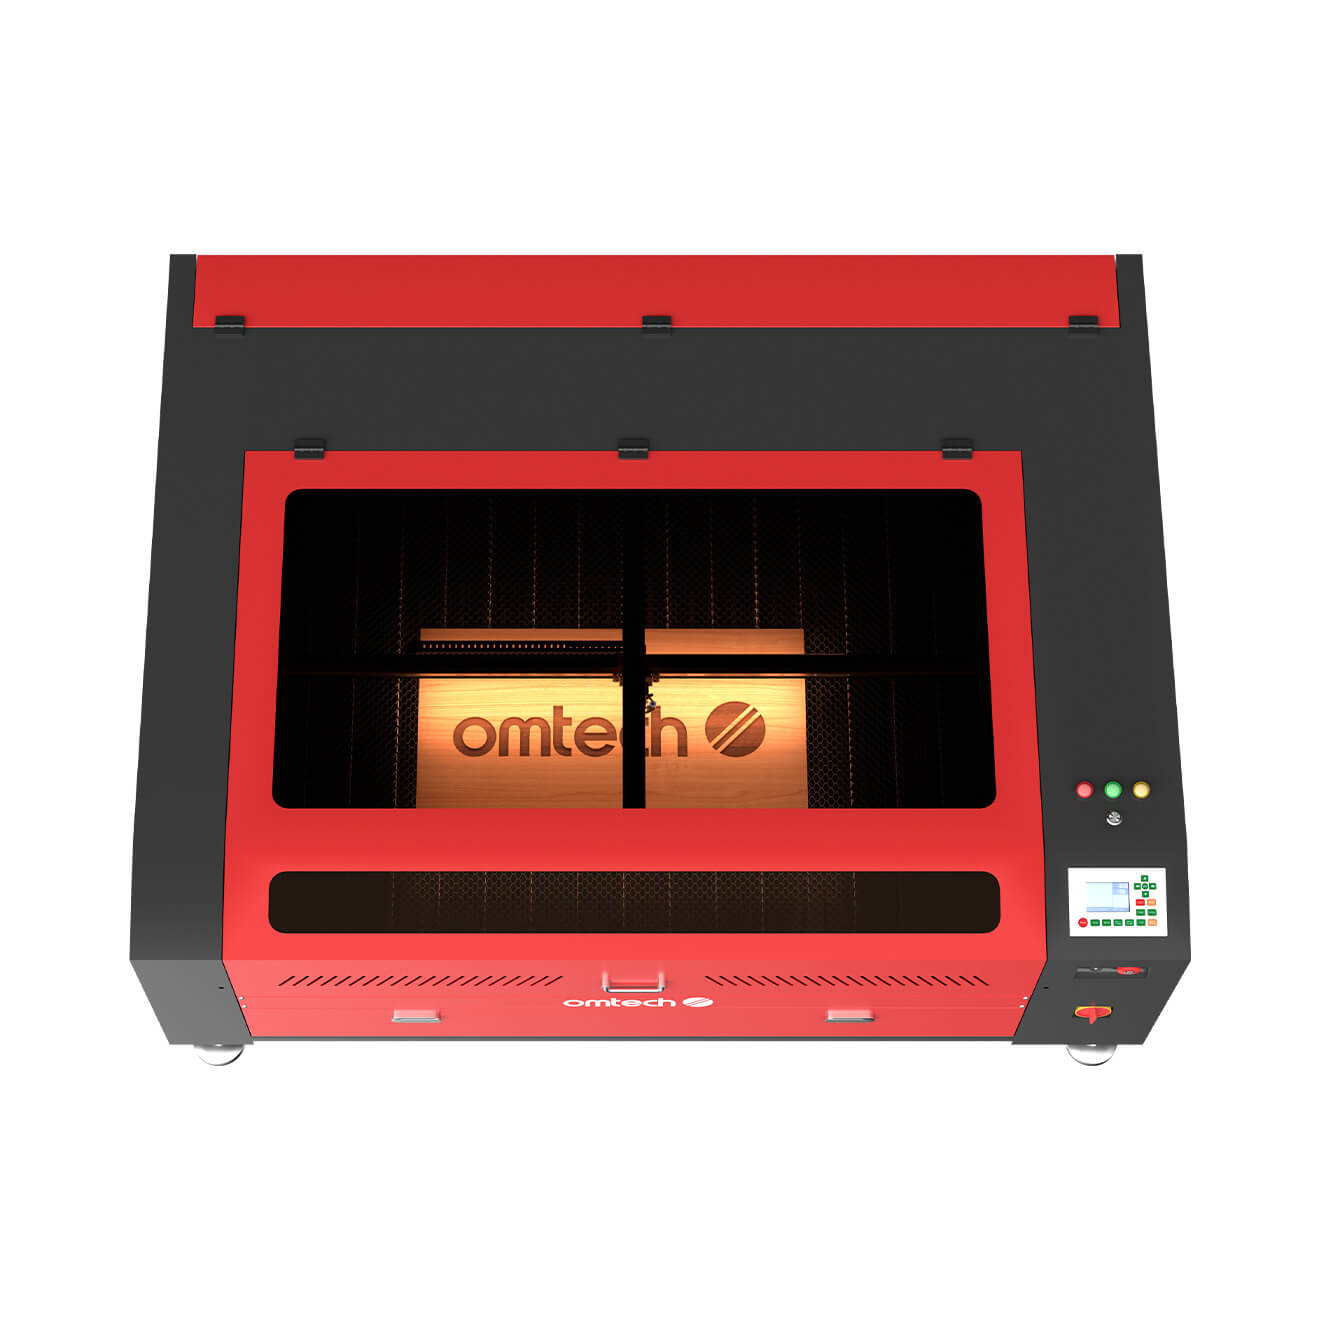 130W CO2 Laser Engraving Machine & Cutter with 1300x900 mm Engraving Area | Max-1393